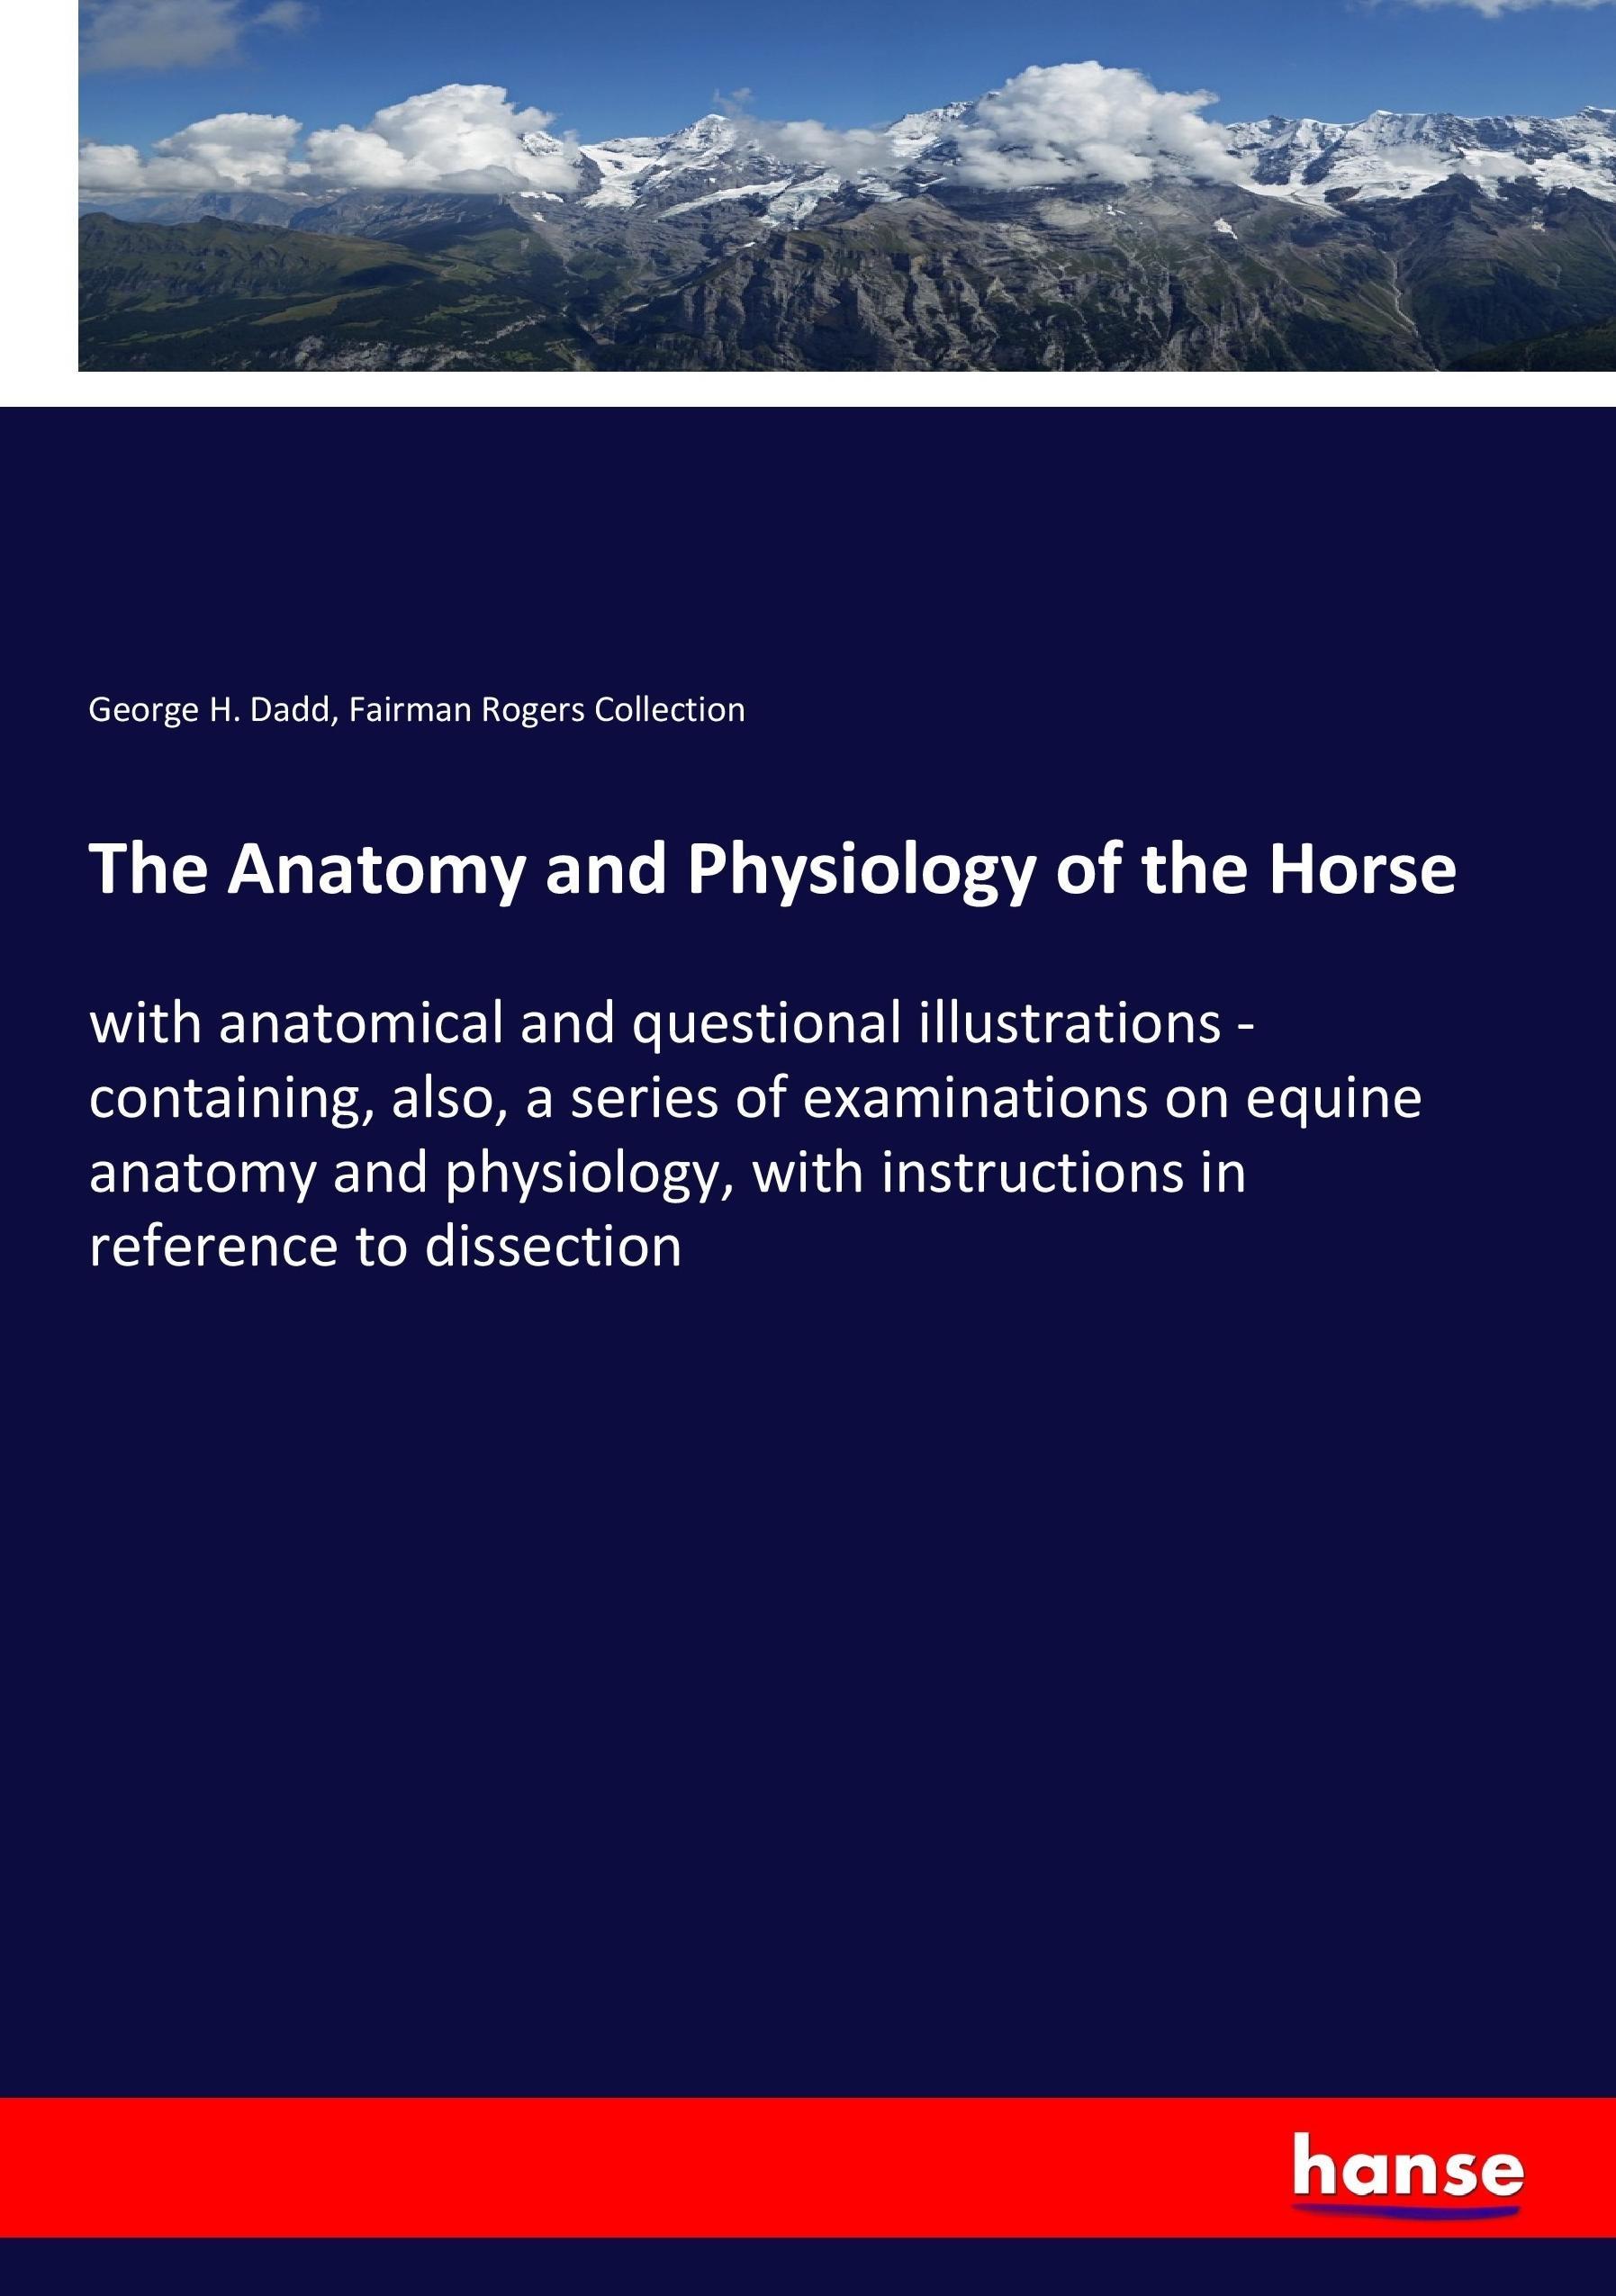 The Anatomy and Physiology of the Horse - Dadd, George H. Rogers Collection, Fairman